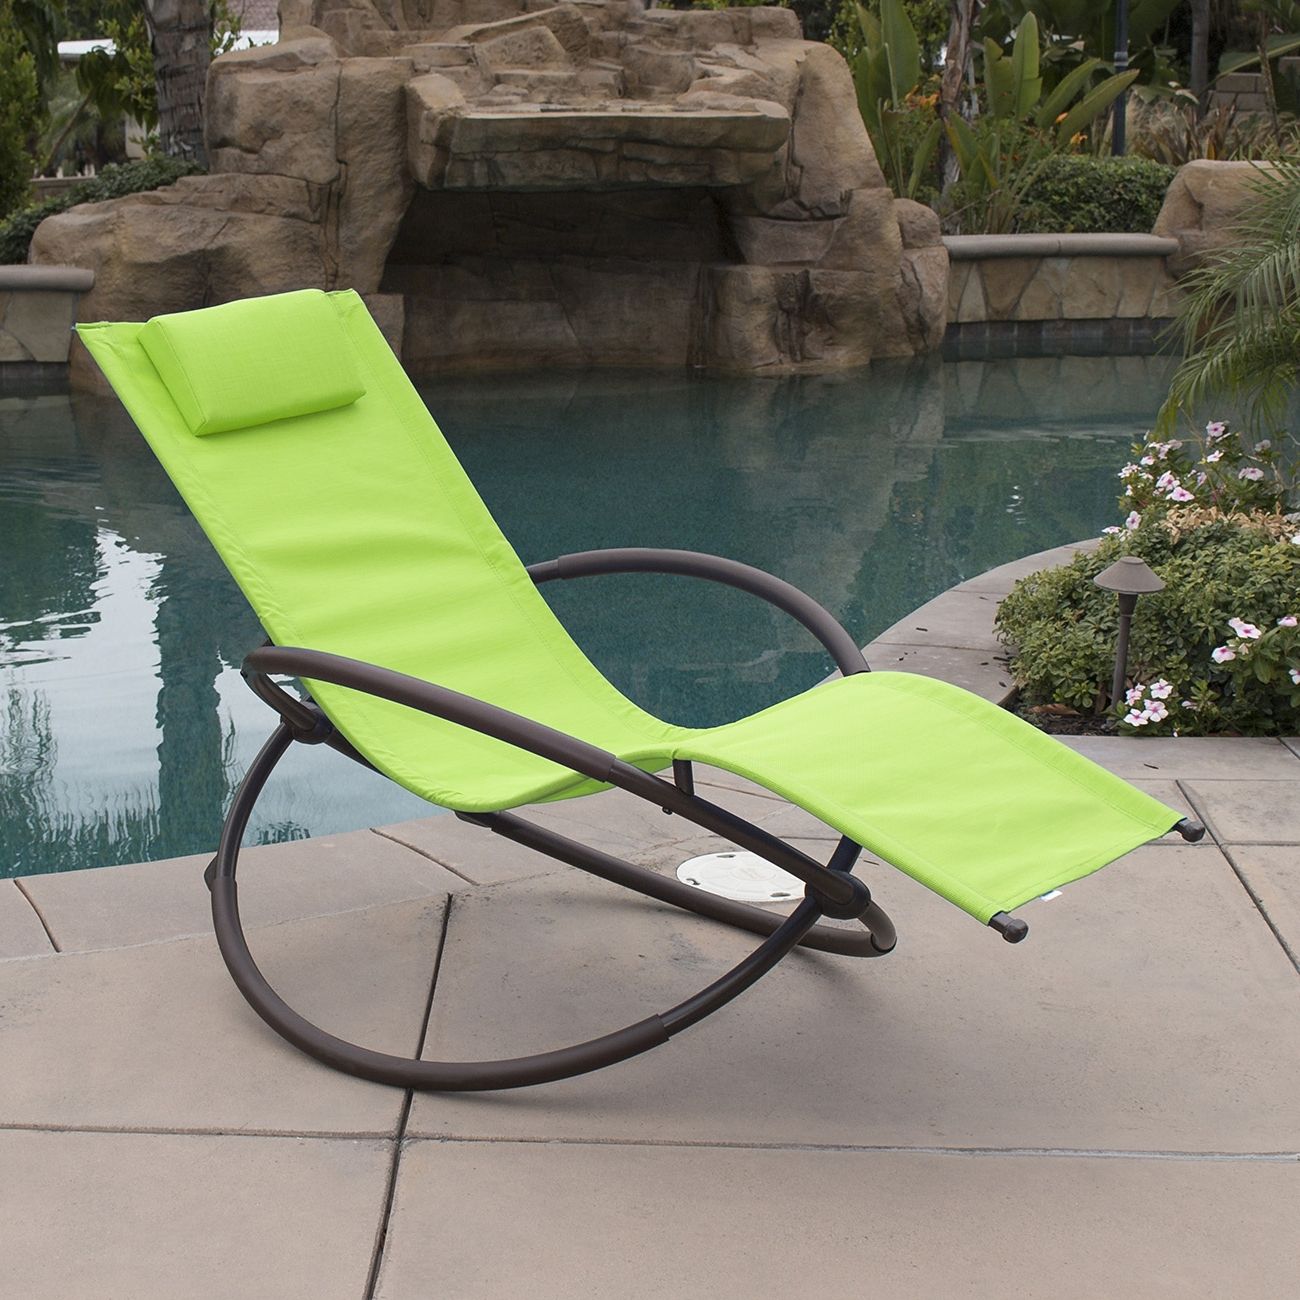 Most Recent Jelly Chaise Lounge Chairs For Outdoor : Folding Beach Chairs Beach Chaise Lounge Jelly Folding (View 14 of 15)